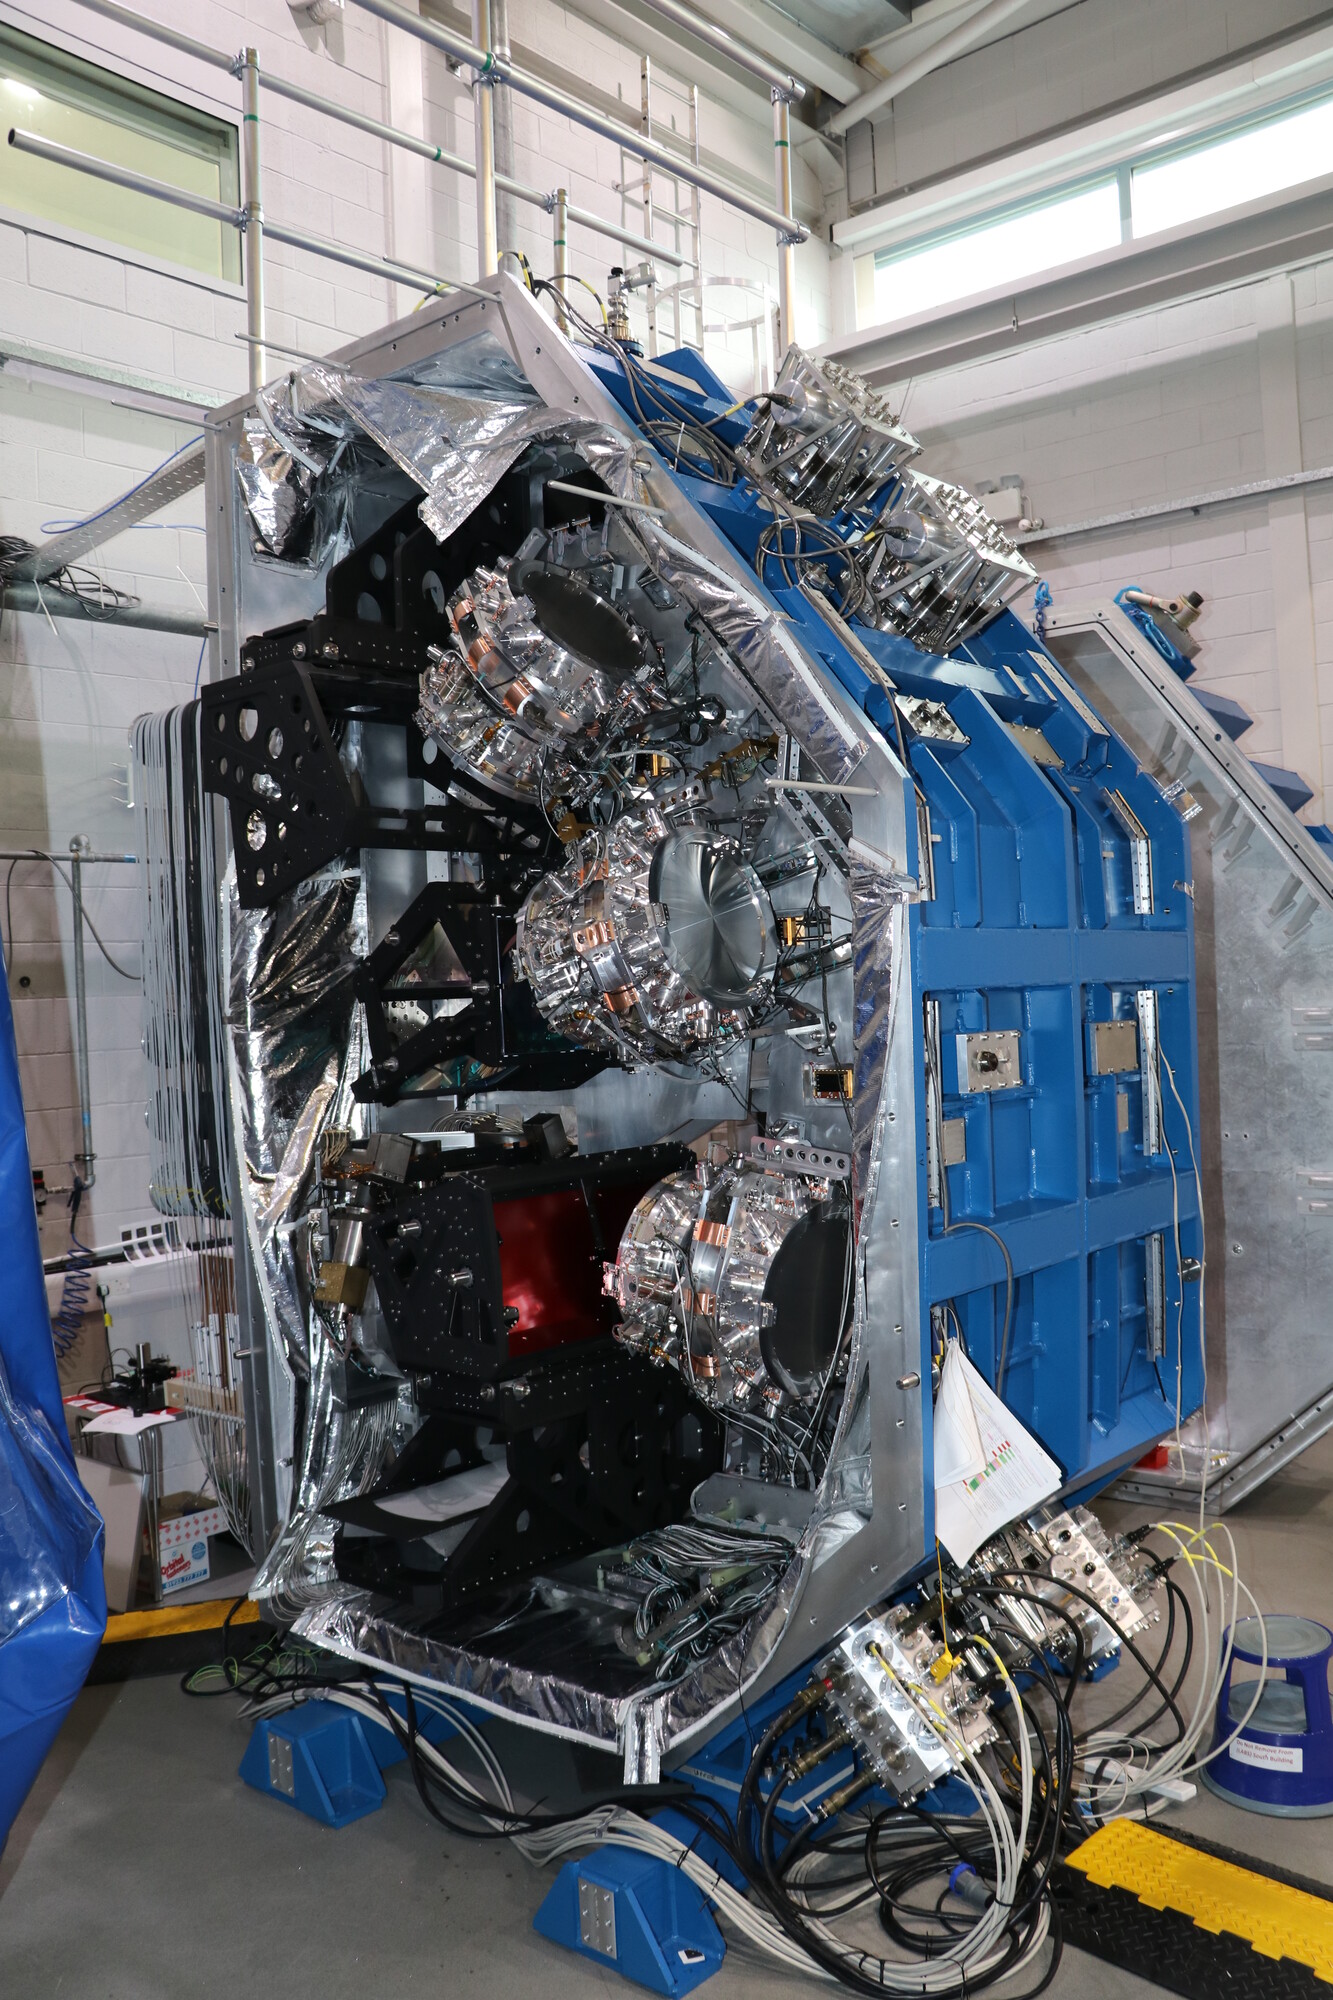 The MOONS instrument in the lab at the UK ATC. It looks like a large, blue metal box with cameras, wires and electronics inside.